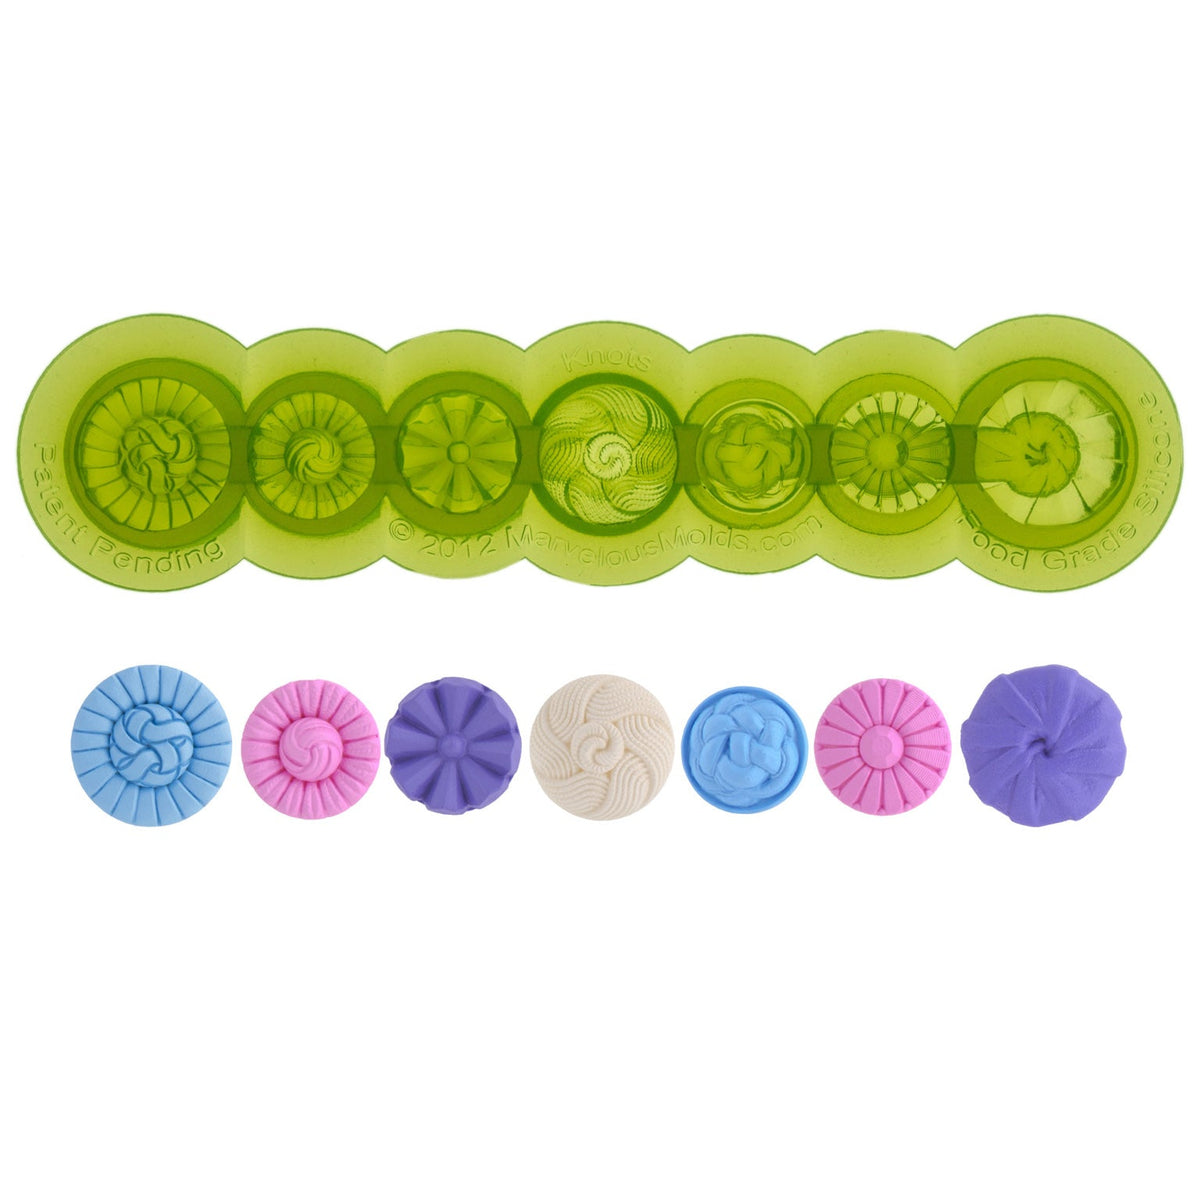 Find Knots Button Mold Marvelous Molds X that is affordable and get the  look at less cost